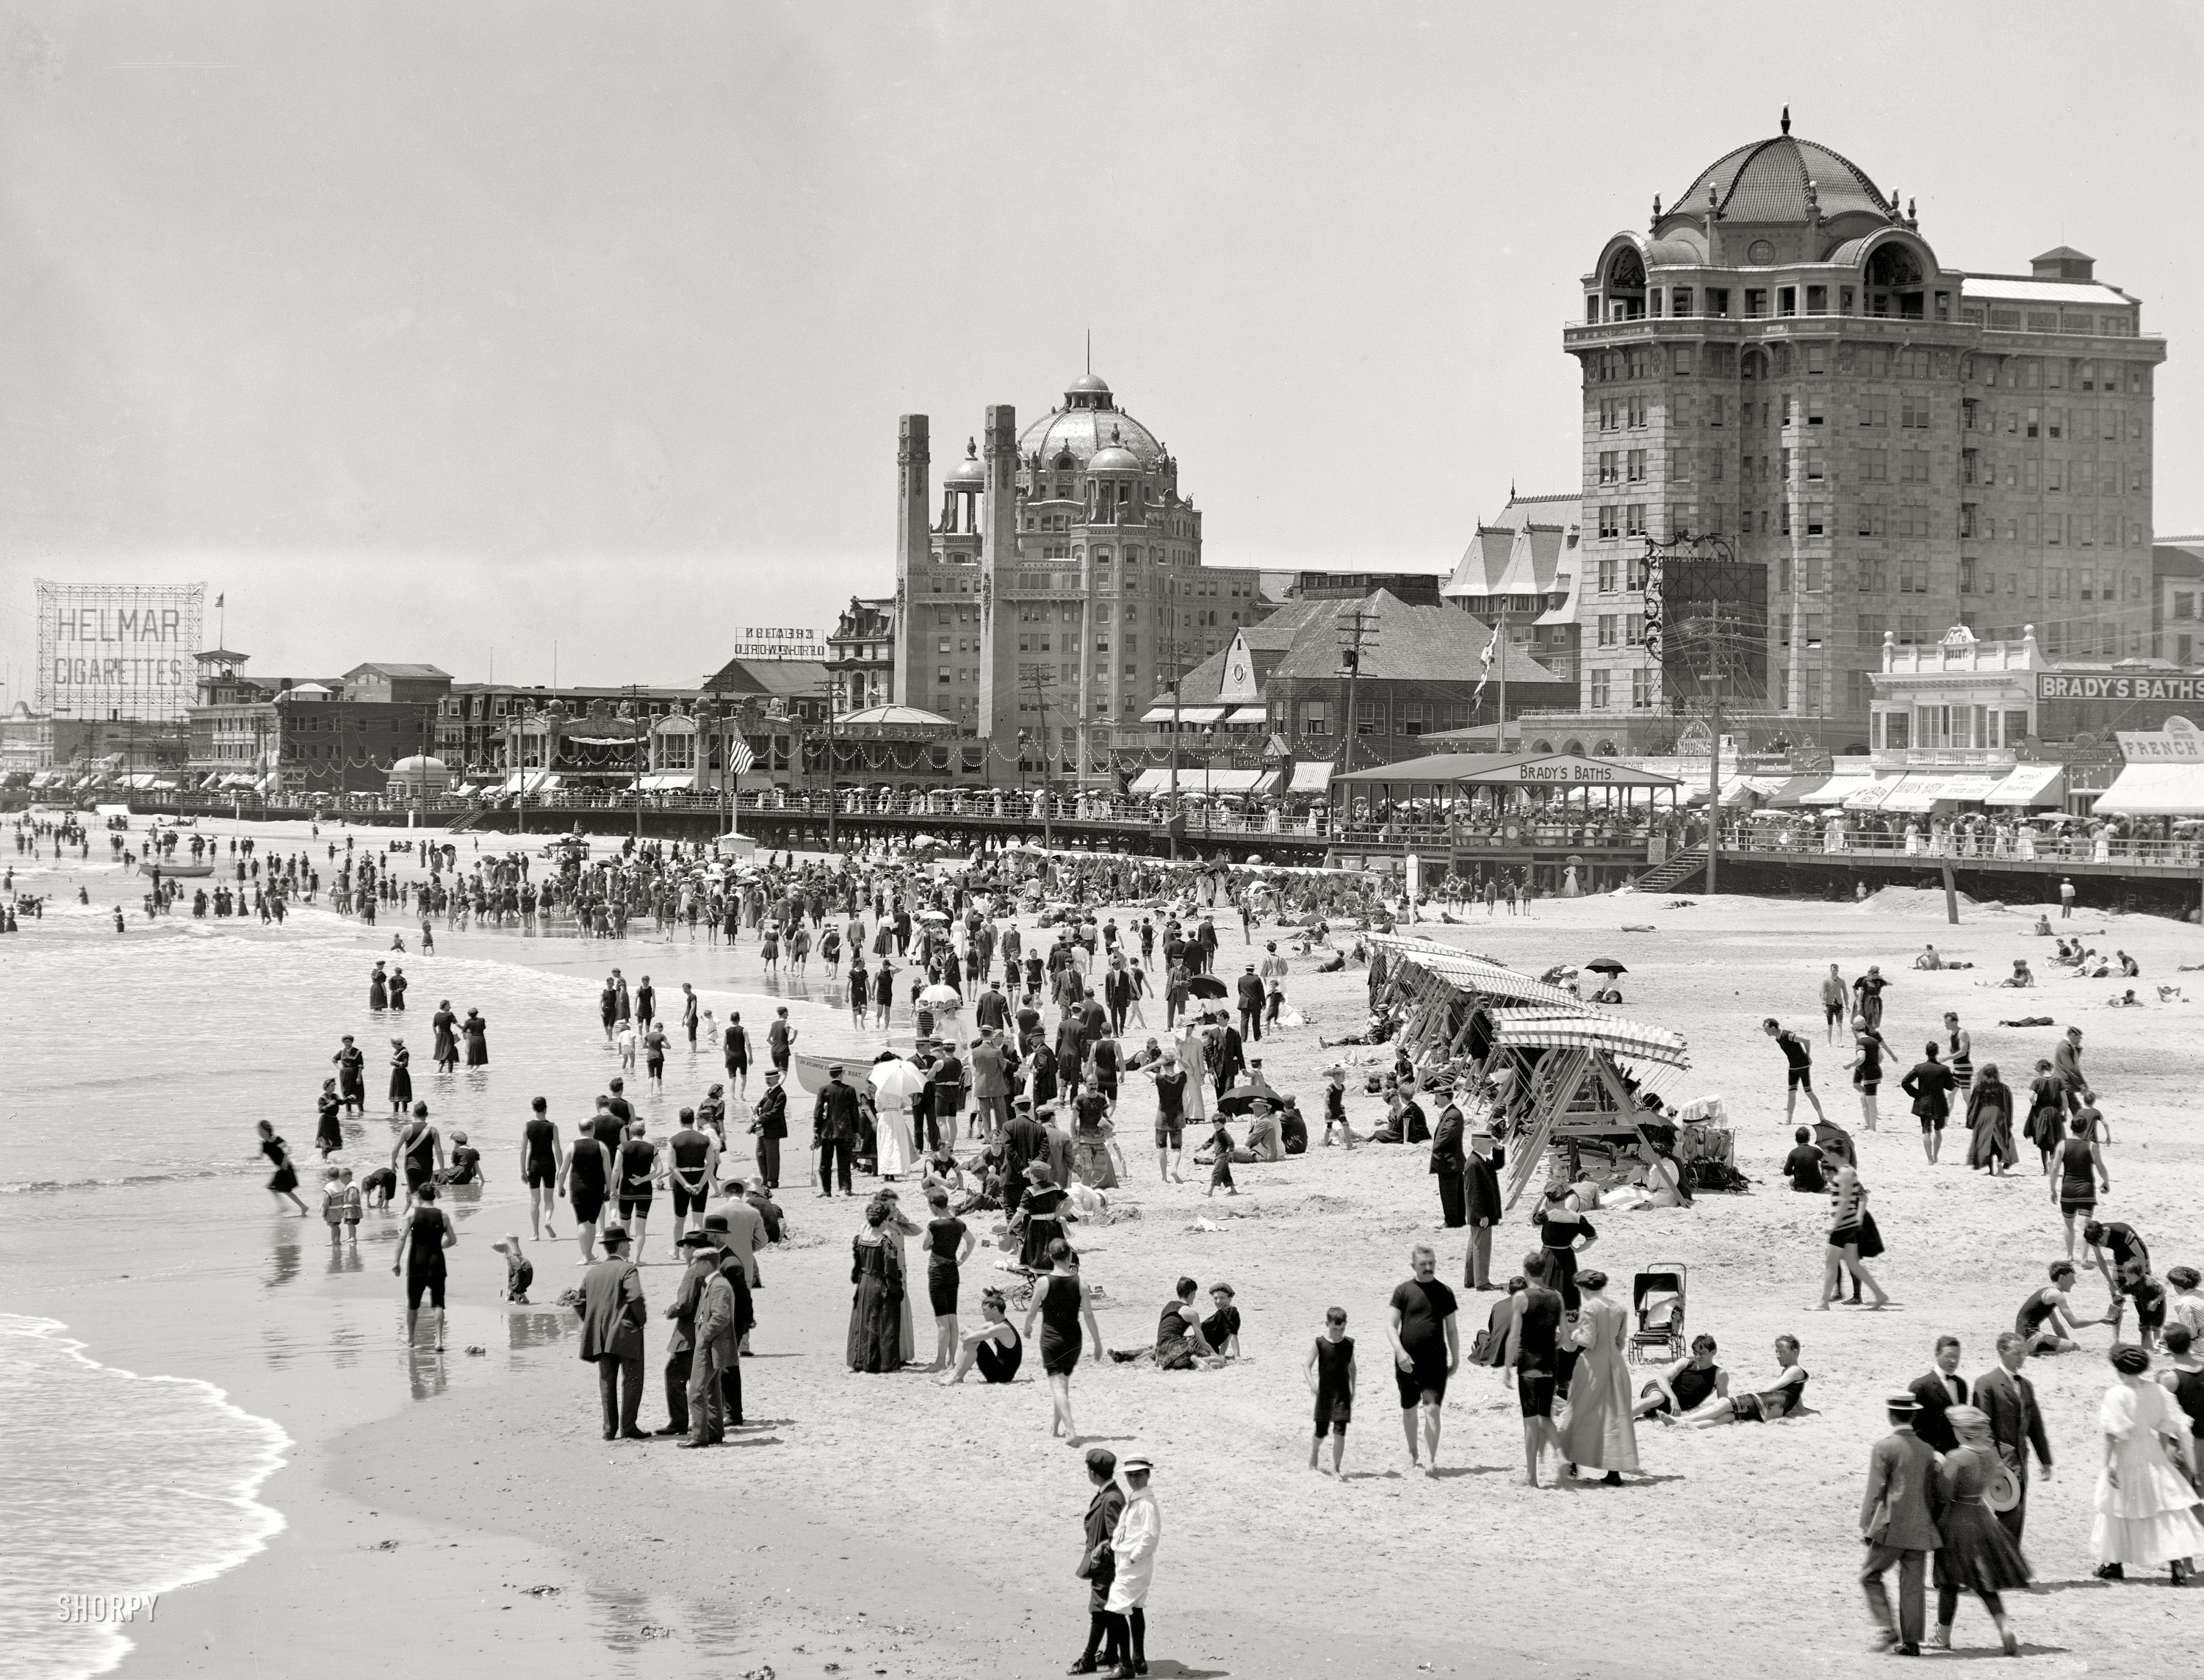 Atlantic City, N.J., ca. 1915. "Bathing in front of the big hotels -- Traymore [right] and Marlborough-Blenheim." Detroit Publishing glass negative. View full size.